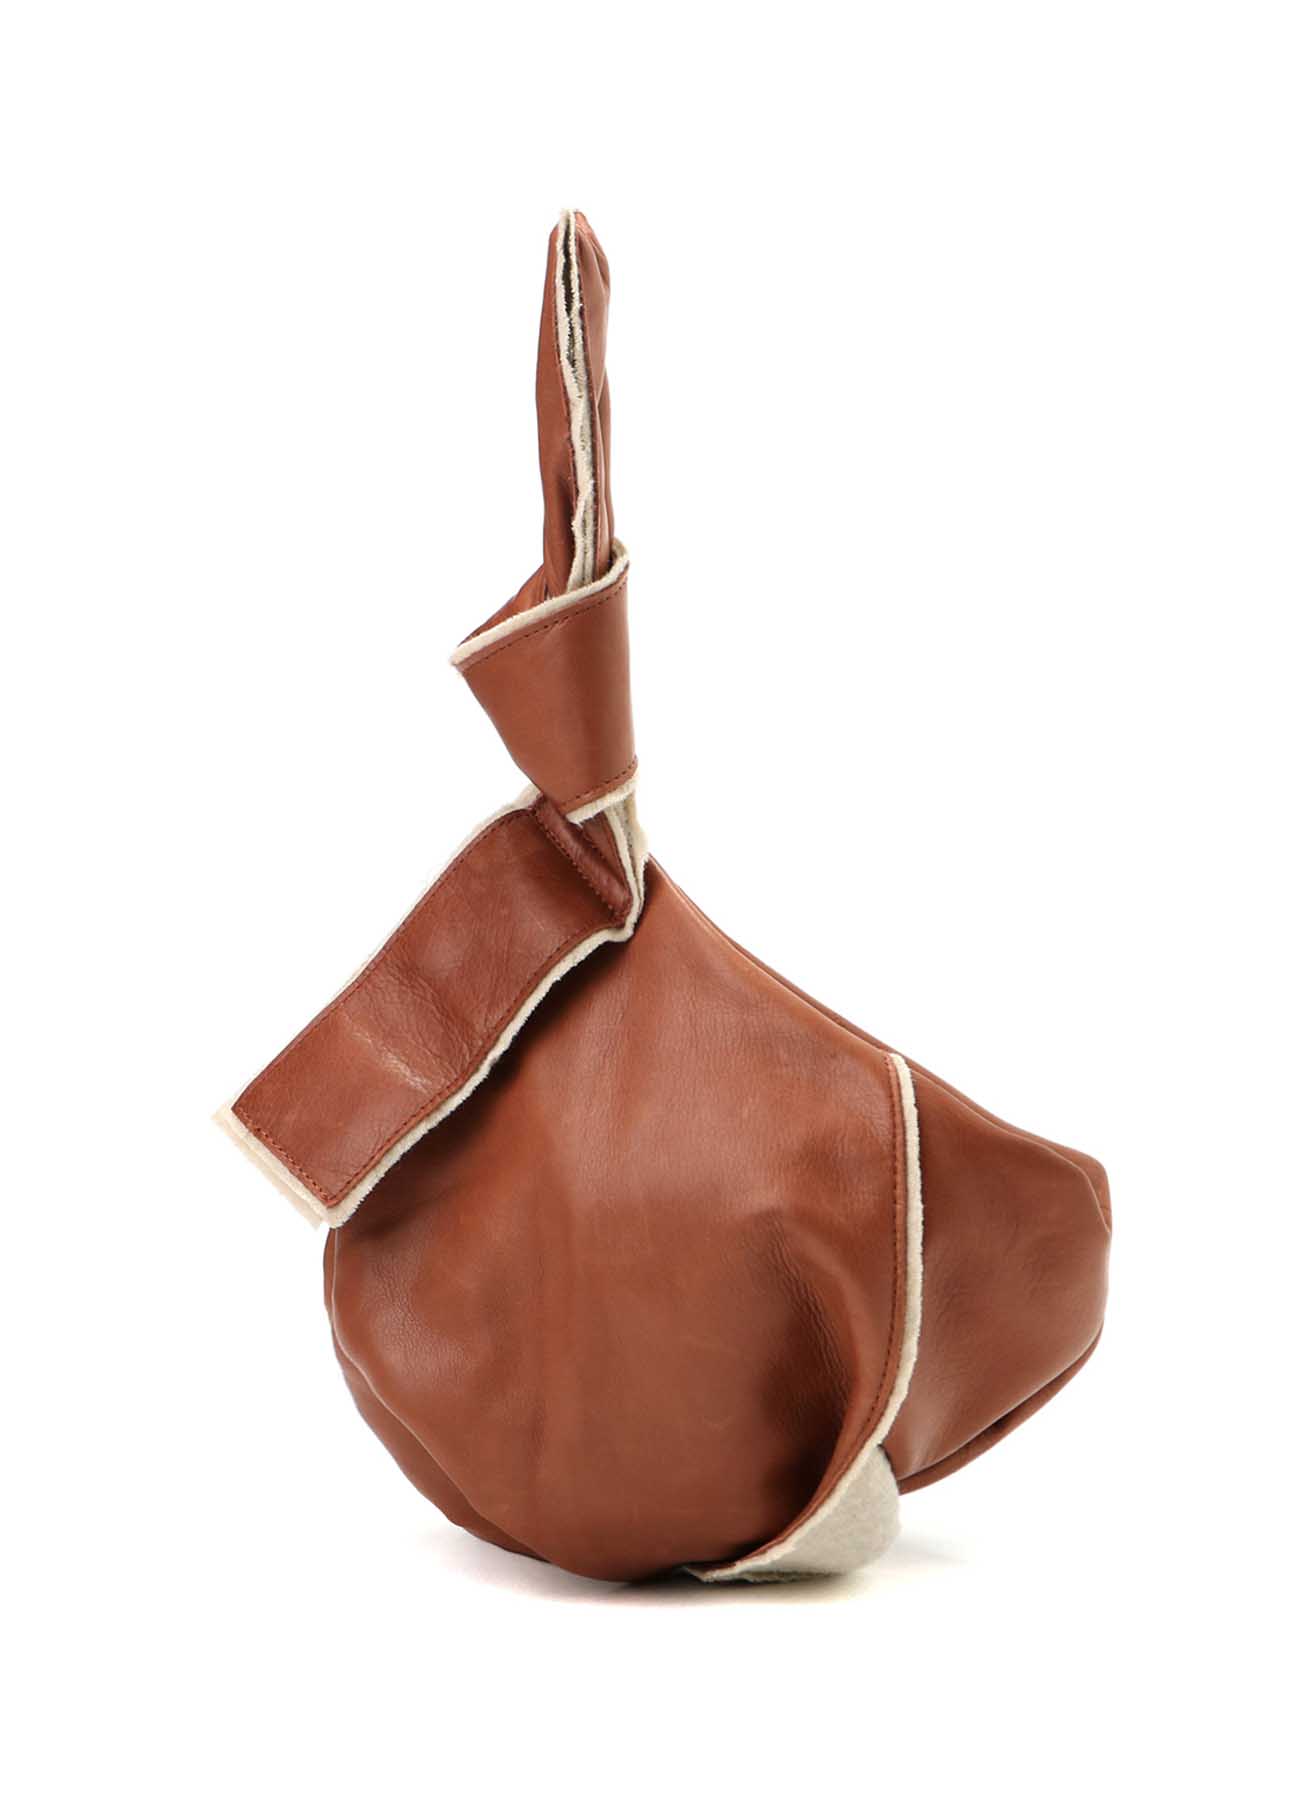 SMALL SCRUNCHED LEATHER HANDHELD BAG